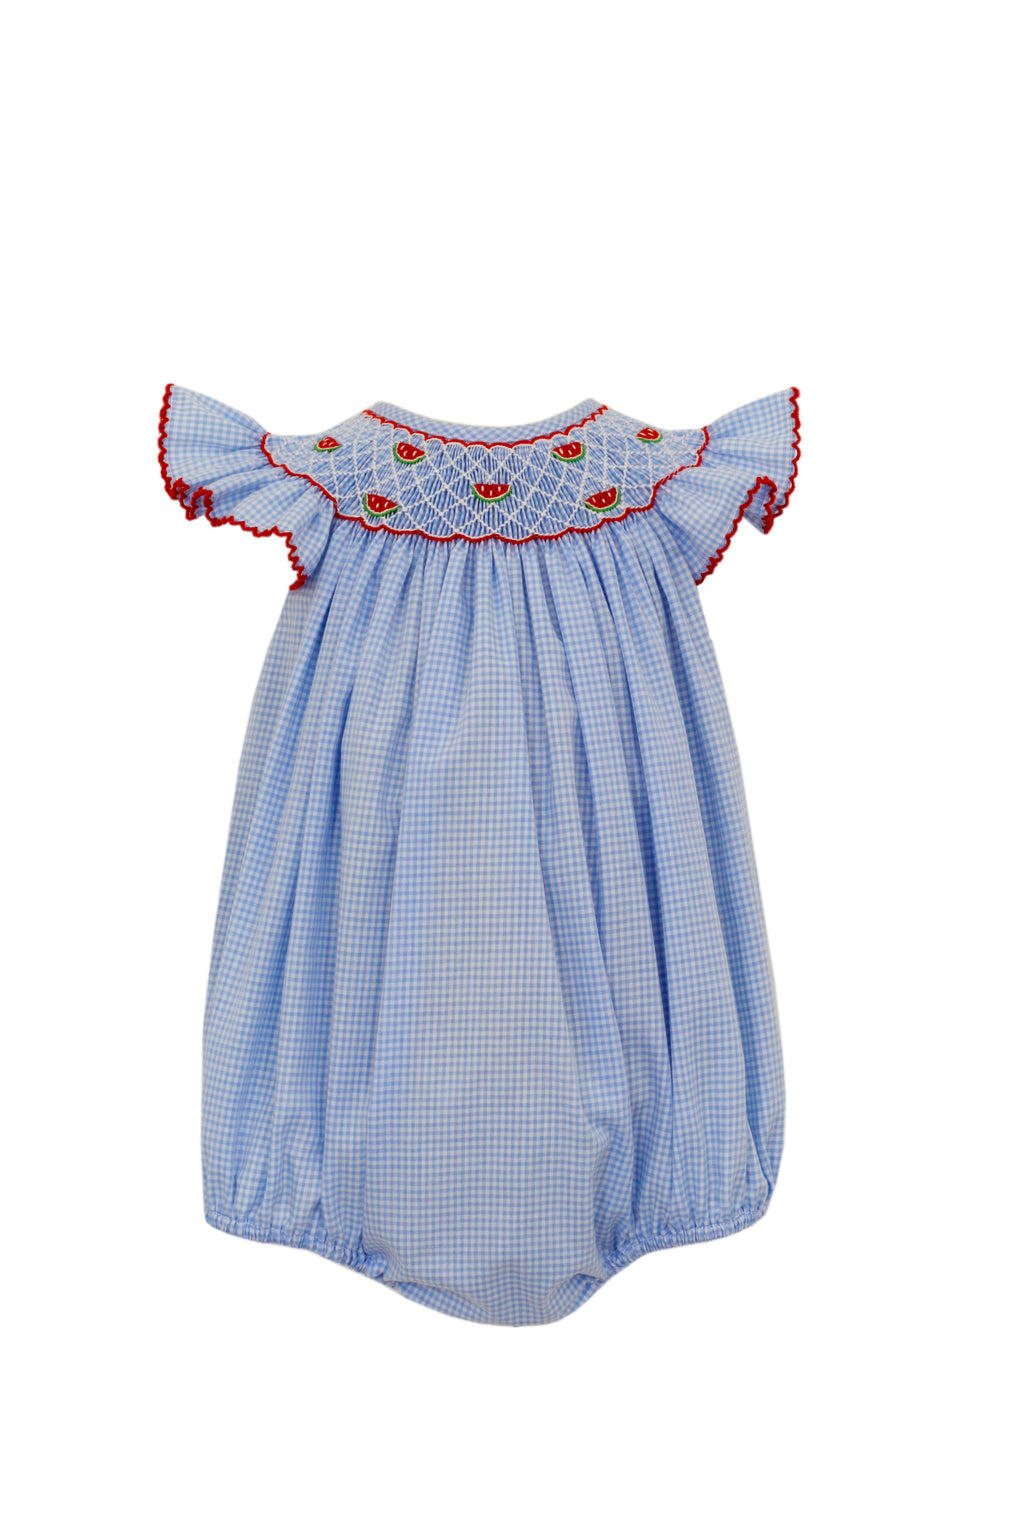 Watermelon Smocked Blue Gingham Angel Wing Bishop Bubble